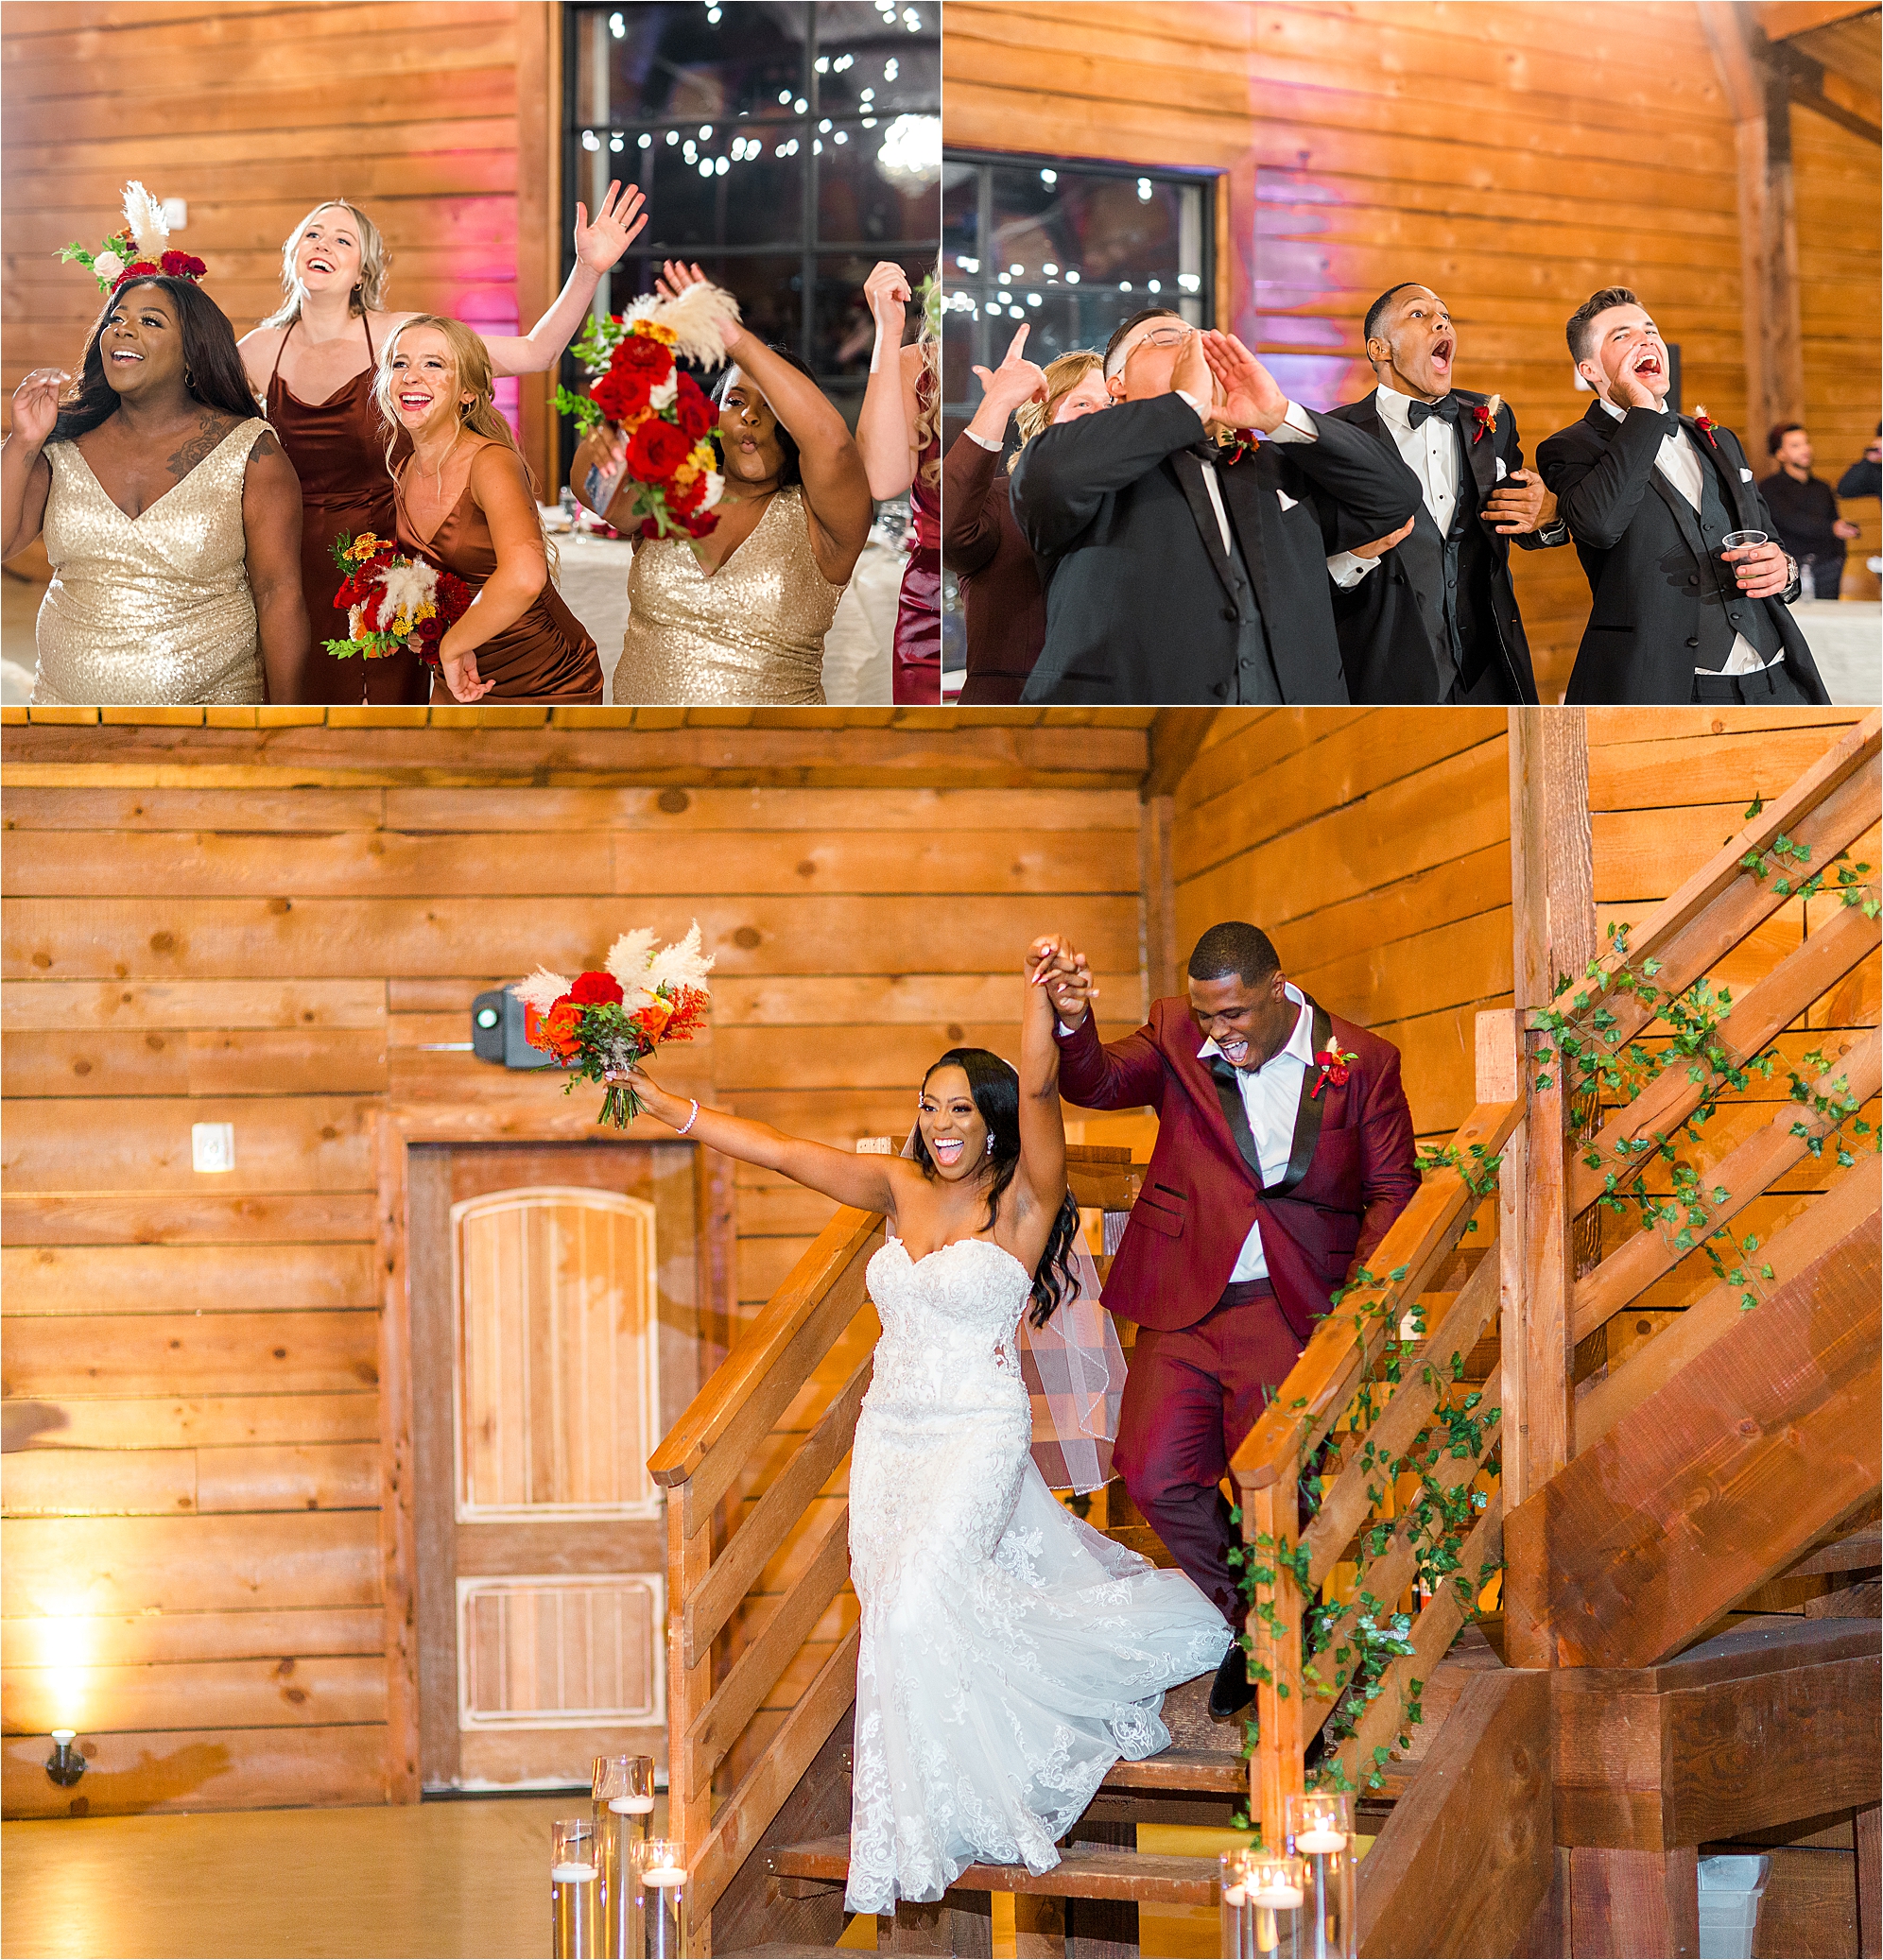 A newlywed couple makes an entrance to their wedding reception as bridal party cheers them on at Morgan Creek Barn 